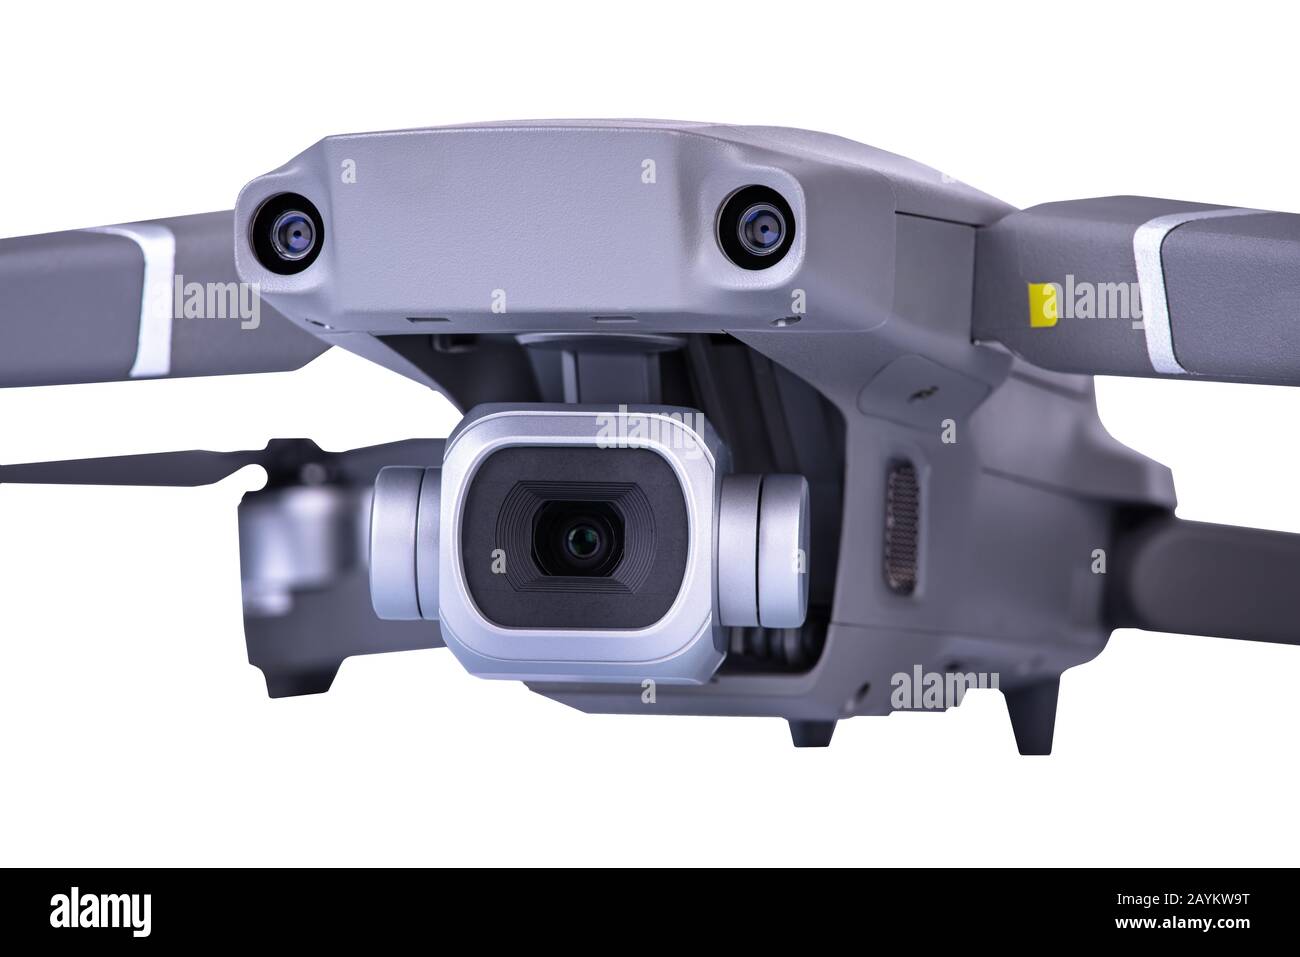 Varna, Bulgaria - Feb 16, 2020: DJI Mavic 2 Pro one of the most portable drones in the market, with Hasselblad camera. Stock Photo